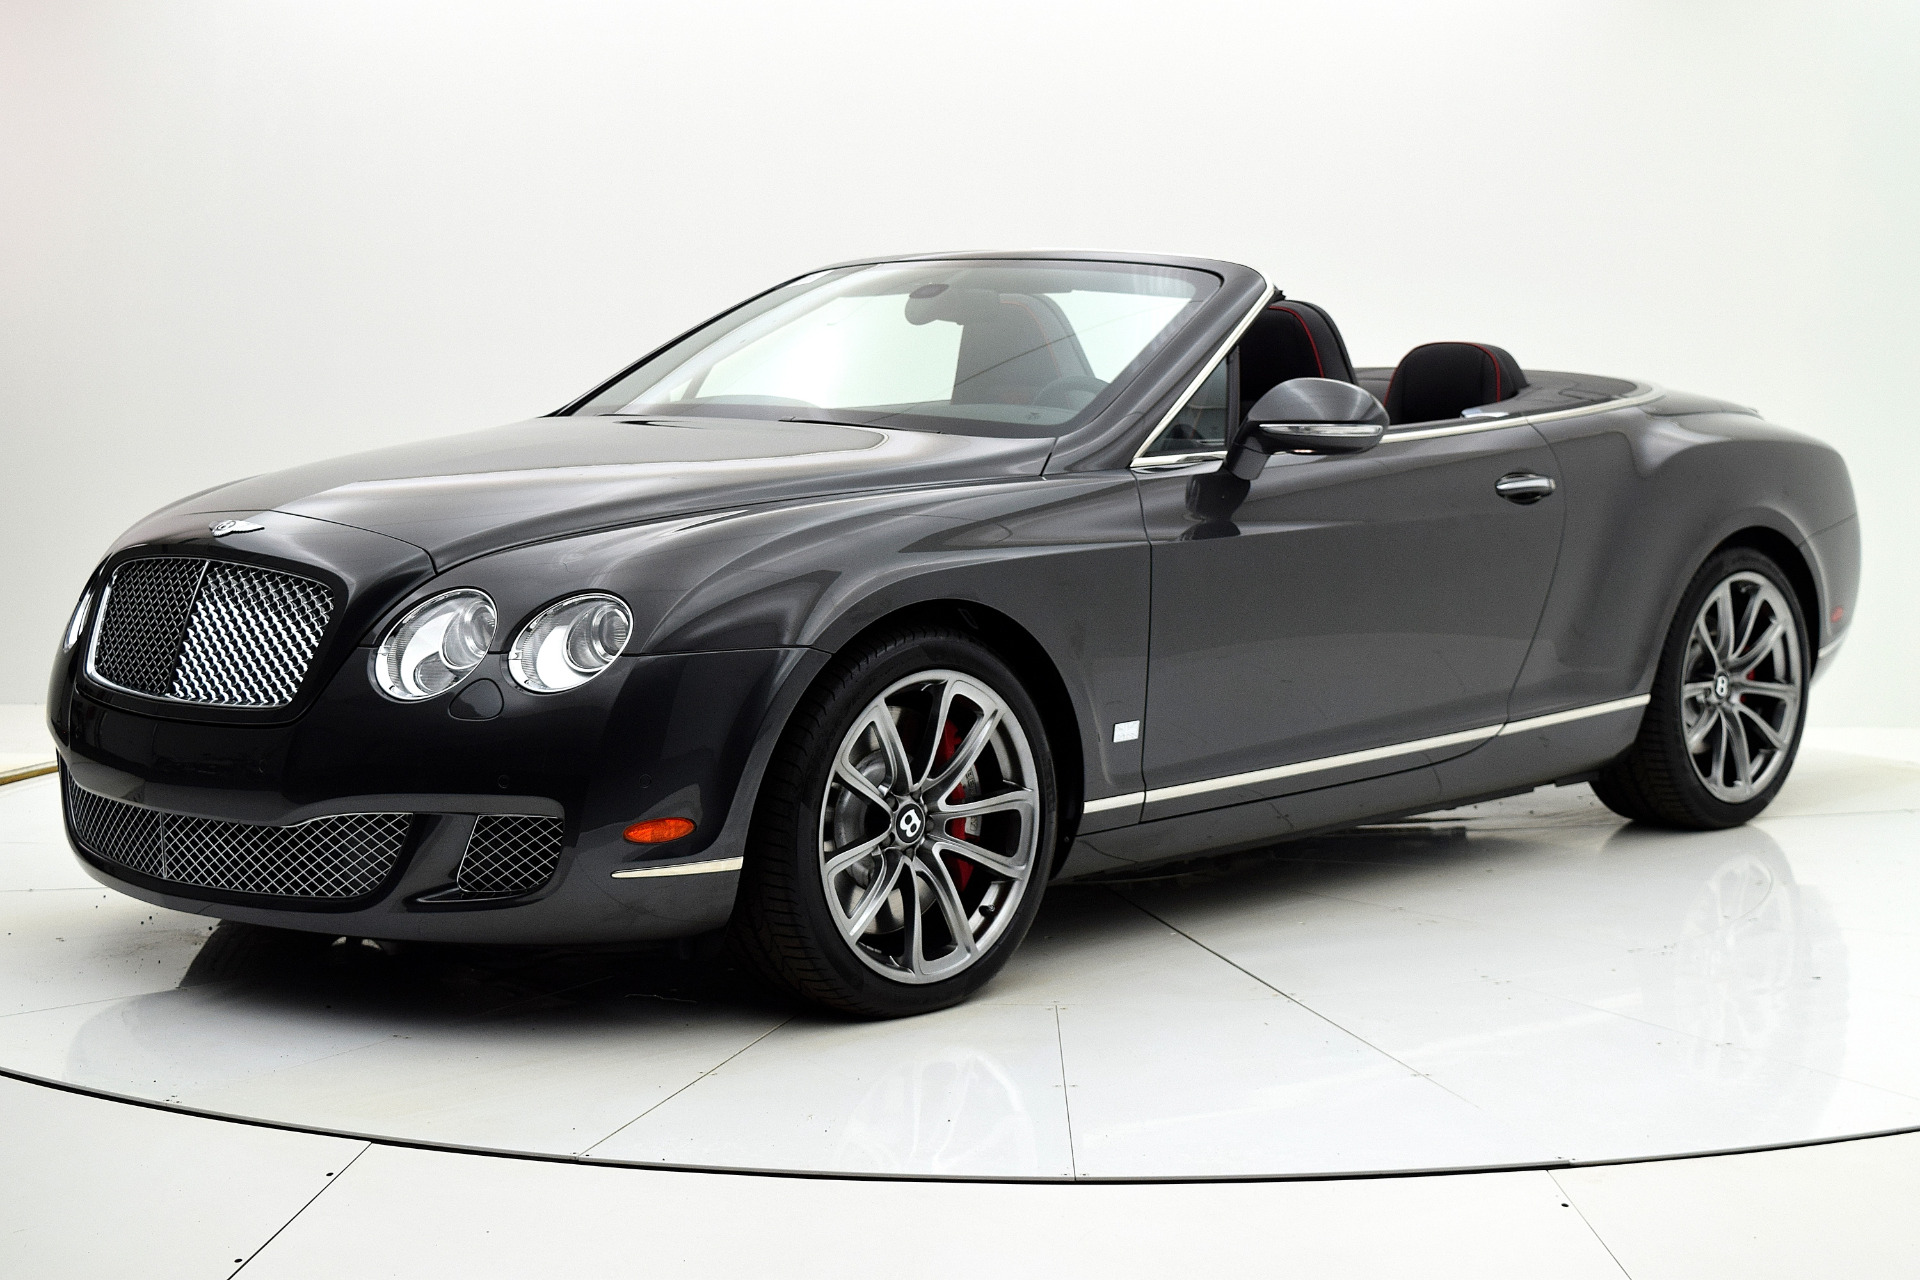 Used 2011 Bentley Continental GT Speed Convertible 80-11 for sale Sold at Bentley Palmyra N.J. in Palmyra NJ 08065 2